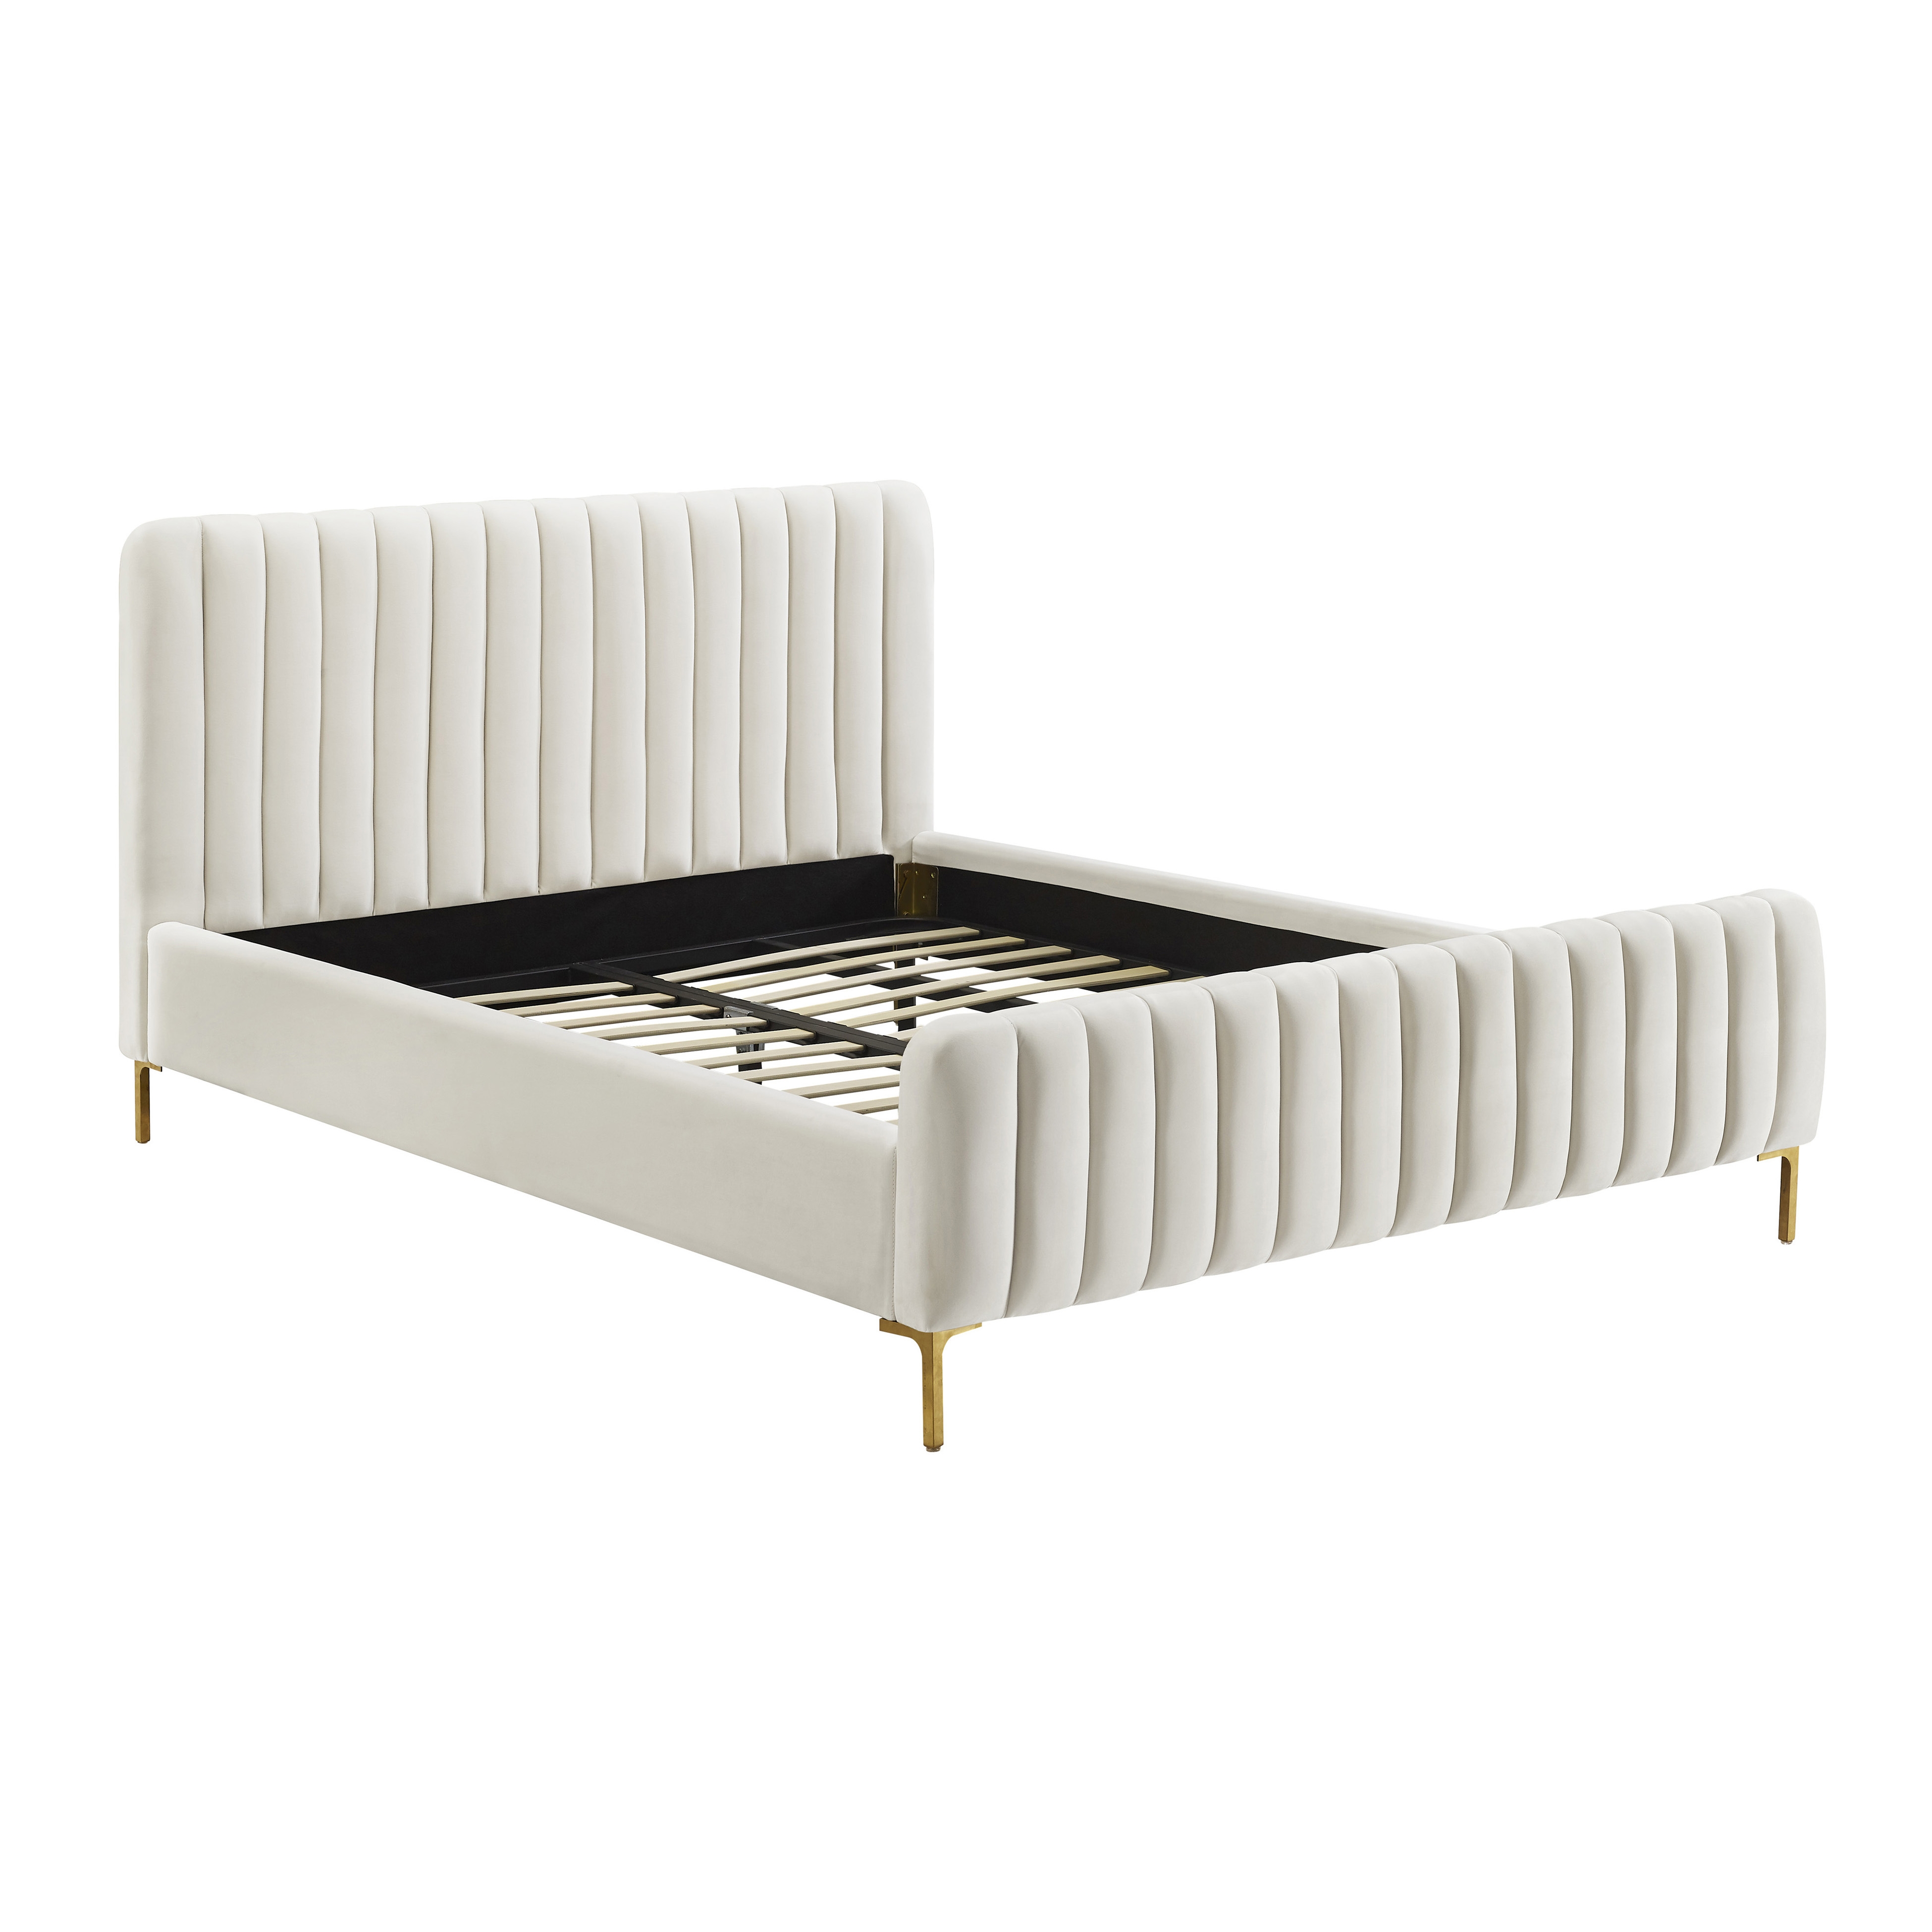 Victoria Cream Bed in King - Image 3